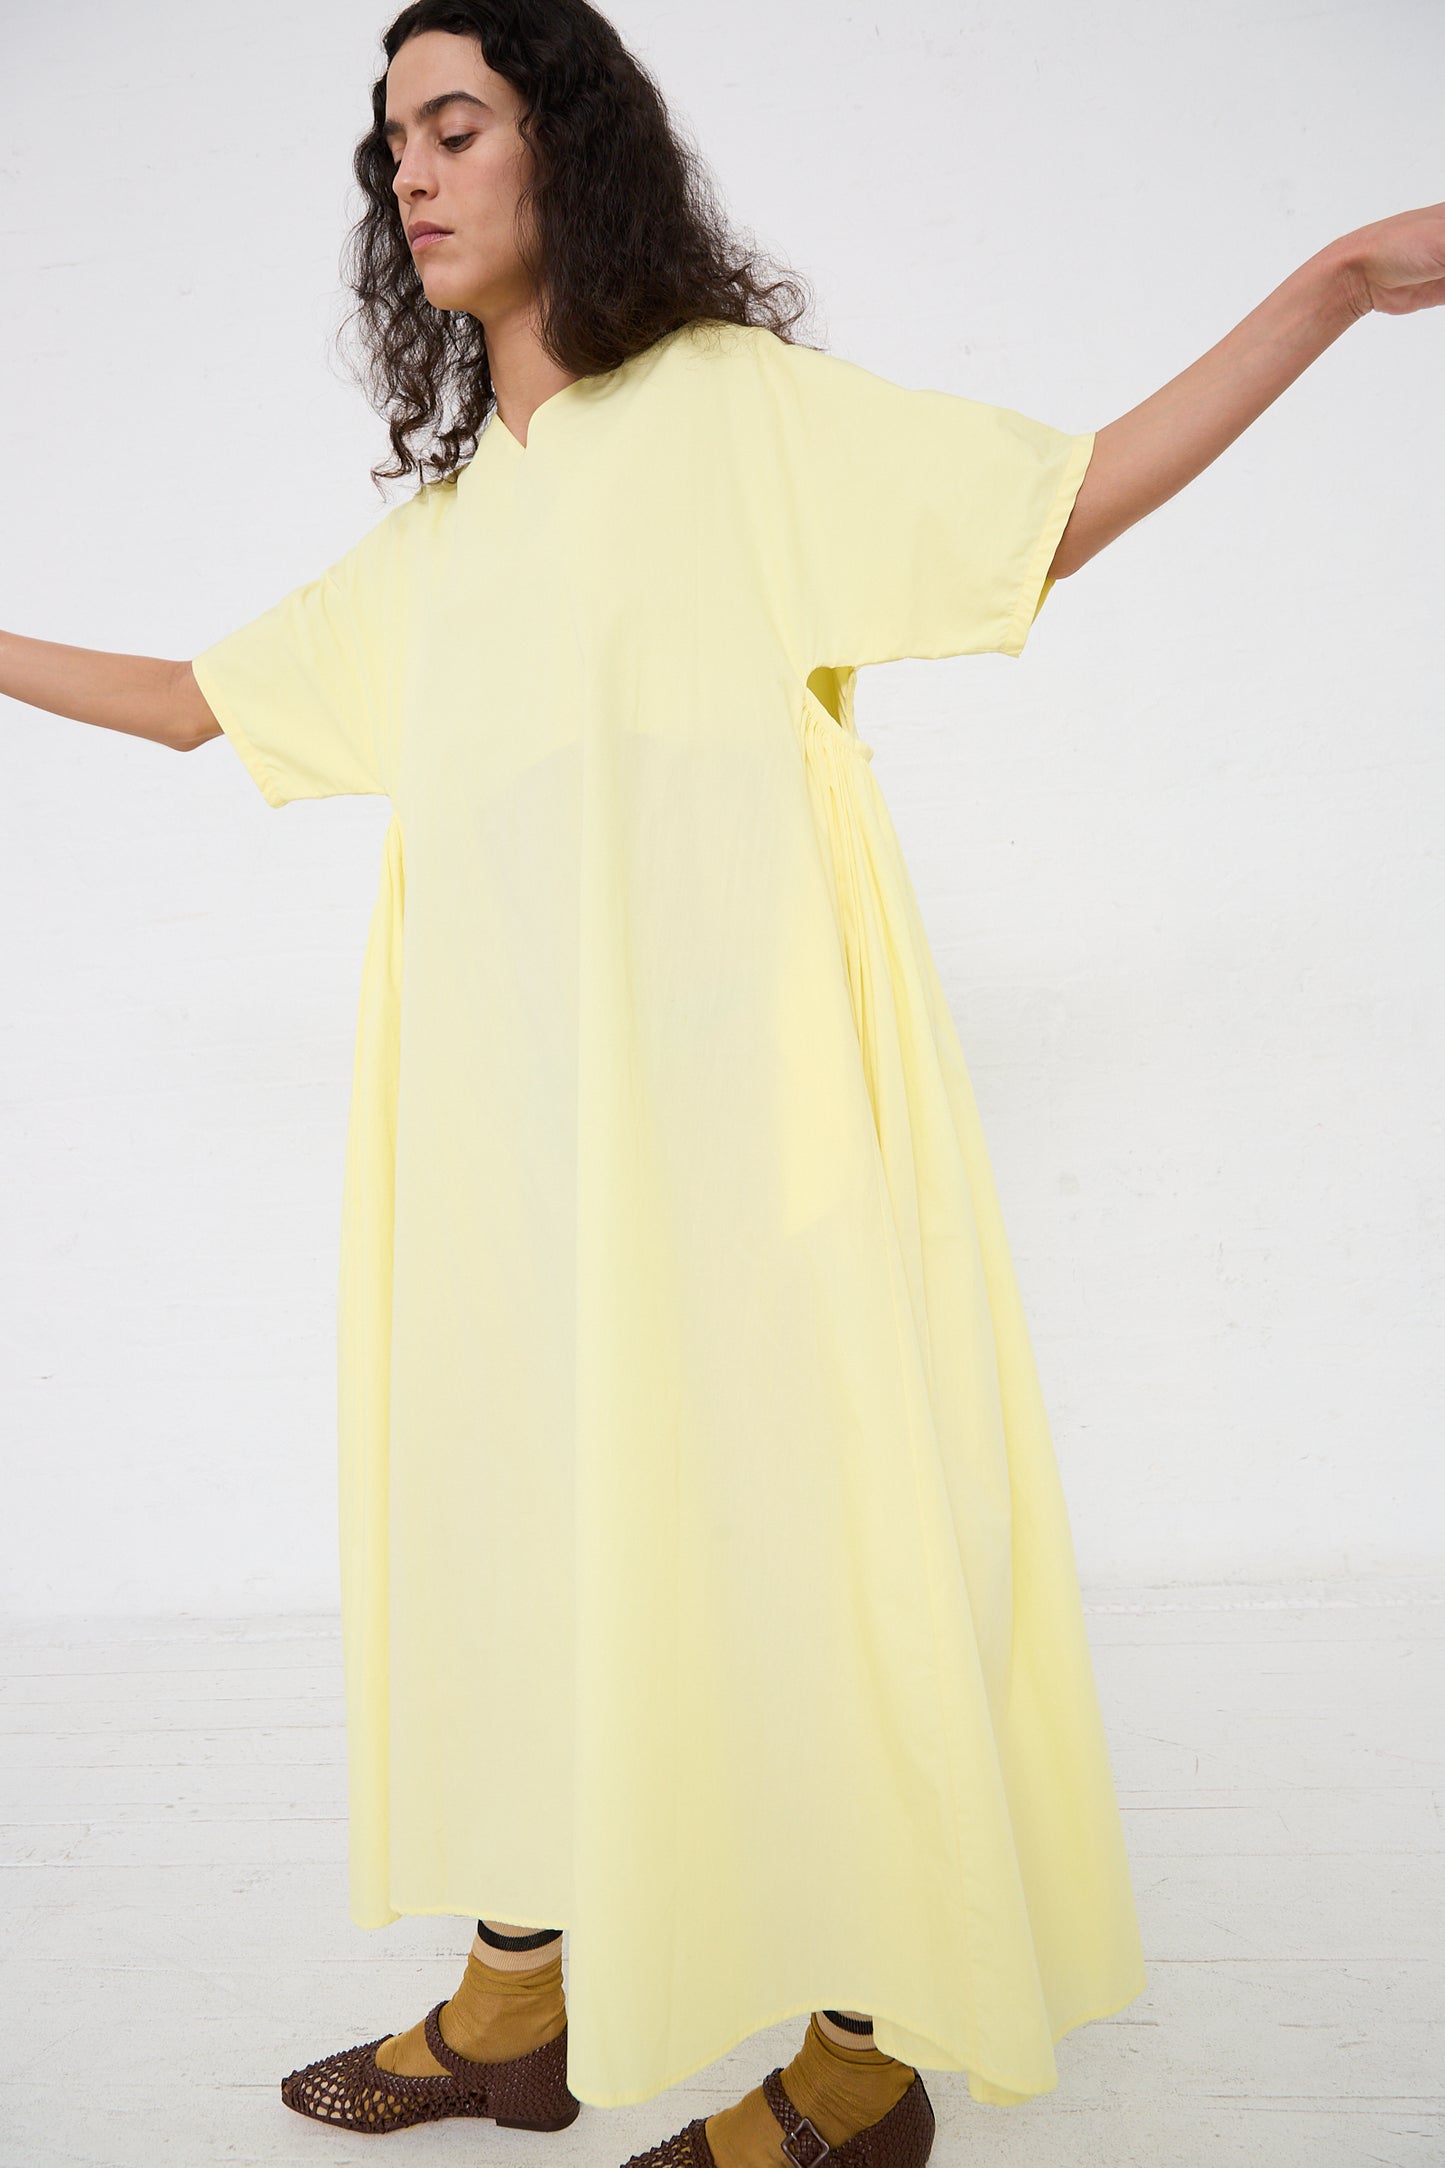 A person in a yellow oversized Black Crane Organic Cotton Star Neck Dress in Lemon with arms extended, against a white background.